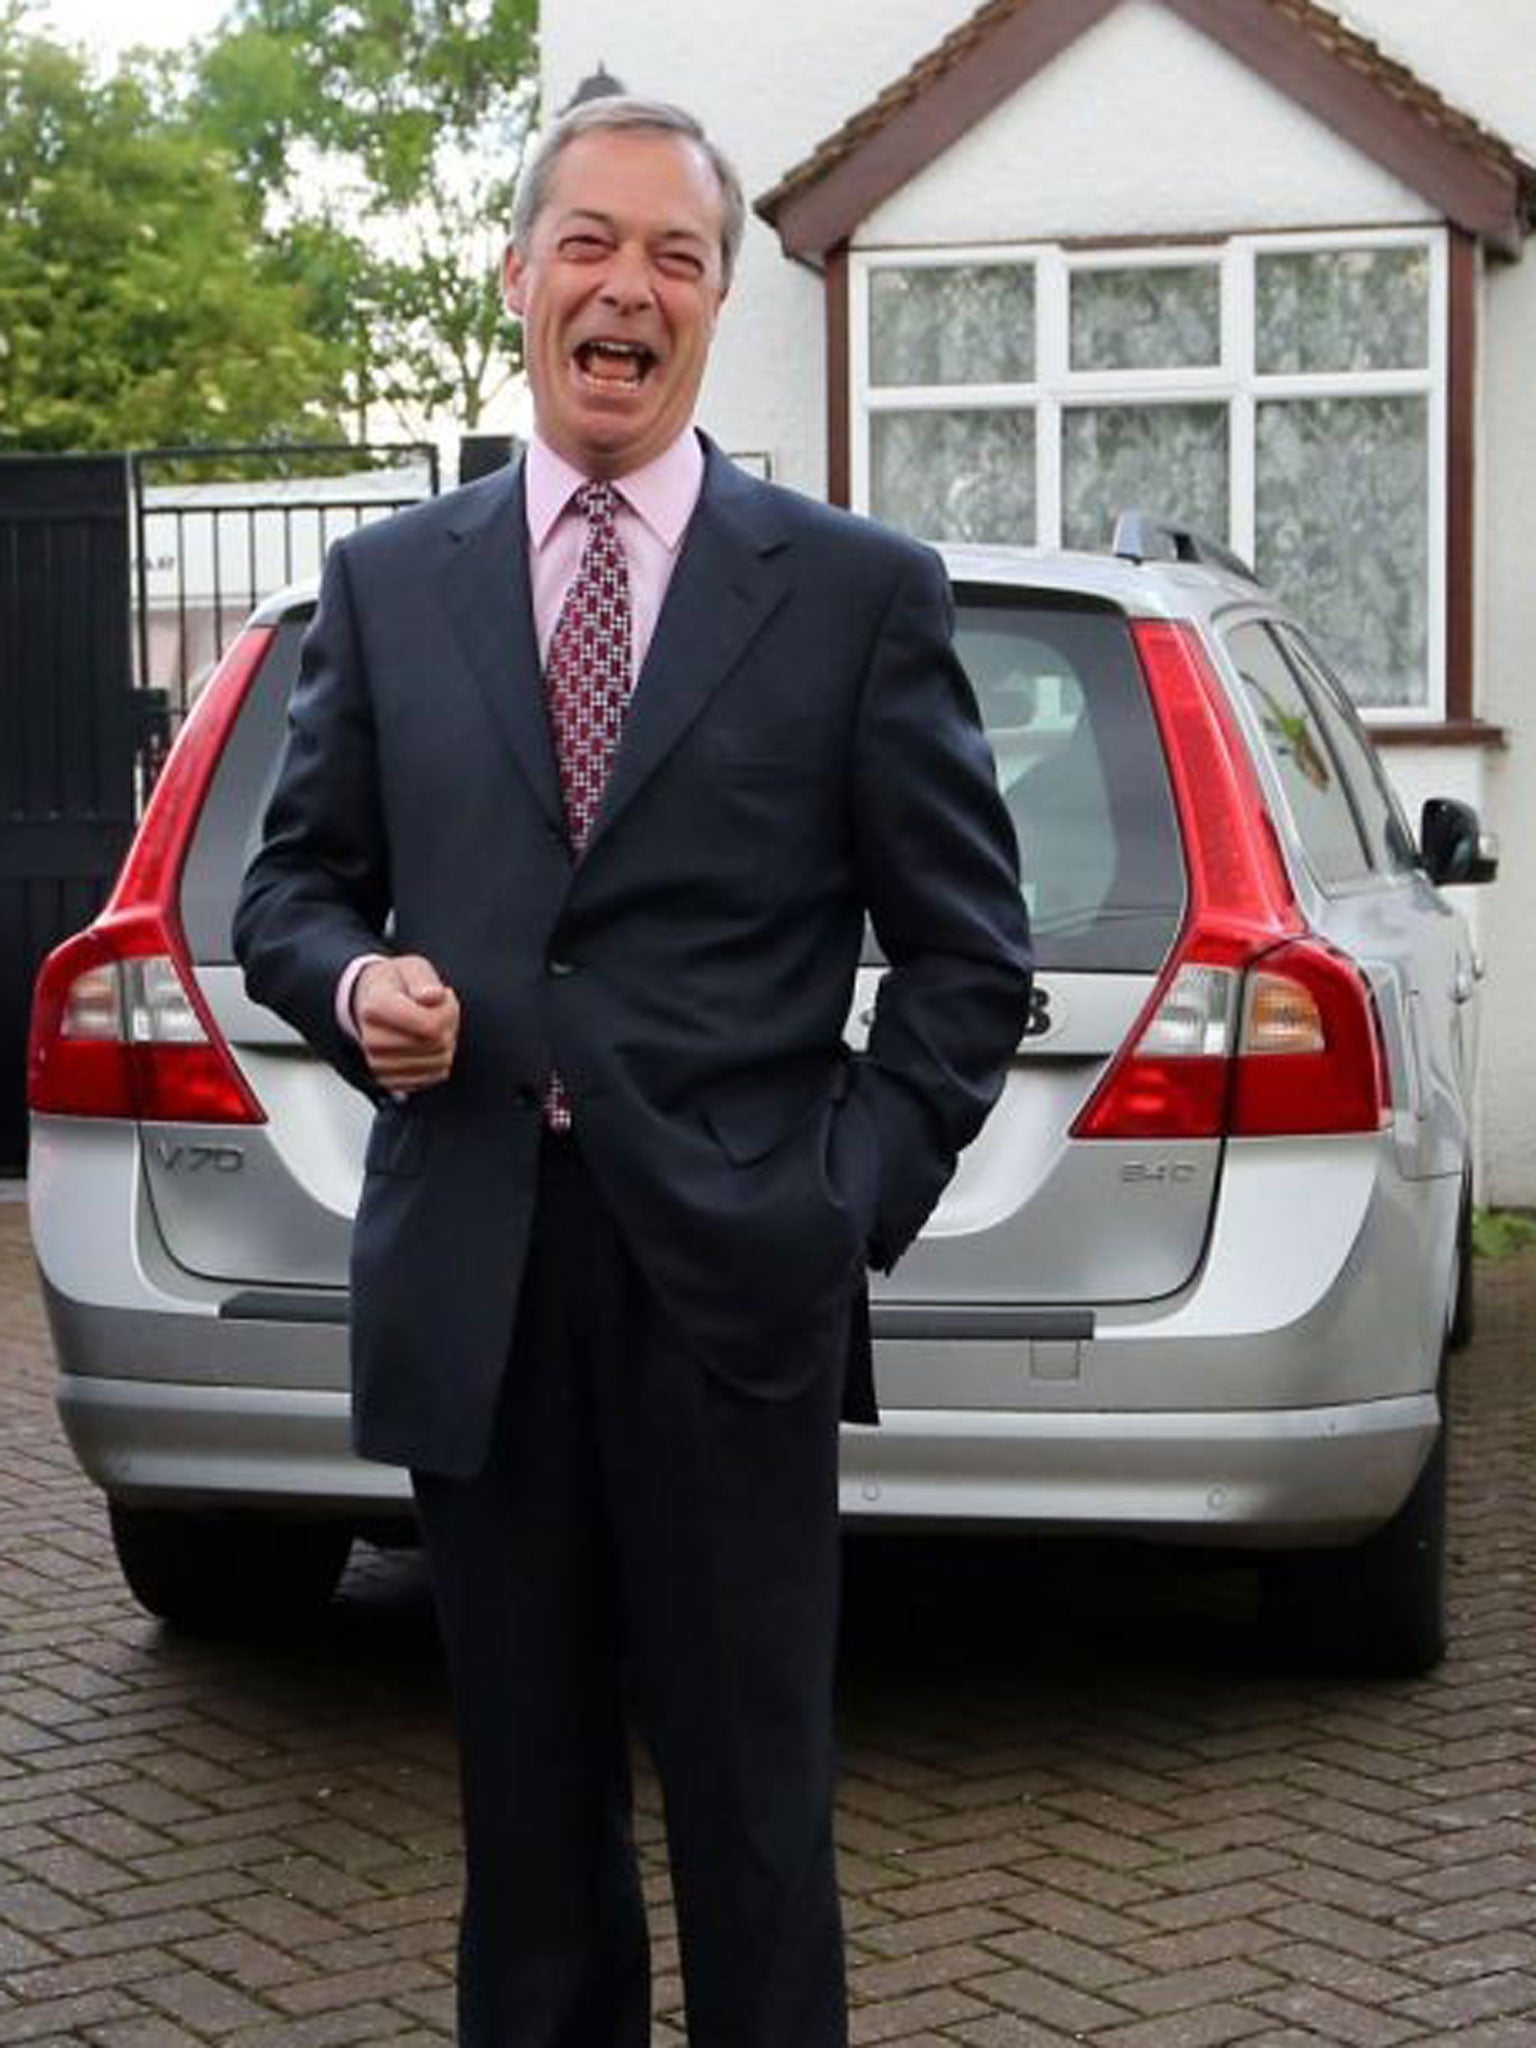 UKIP Leader Nigel Farage leaves his home in Cudham, Kent, as his party made gains across the country following yesterdays voting in local council elections.